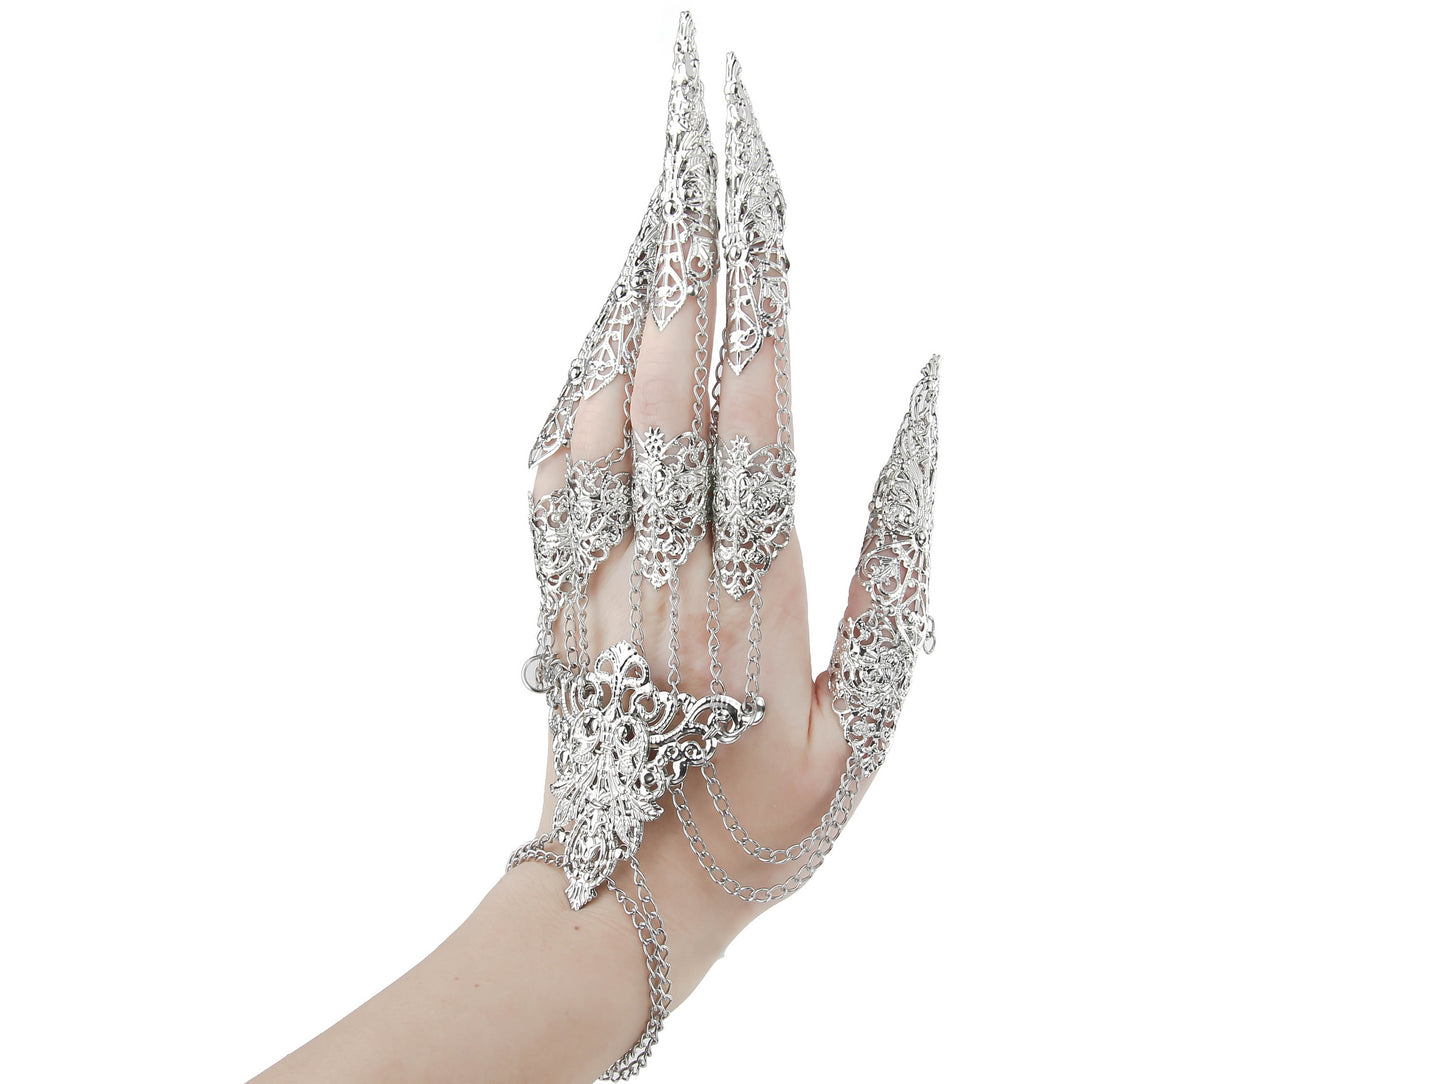 Gothic-inspired hand jewelry showcasing ornate silver filigree work with claw-like tips, designed for a bold dark fashion statement. The metal glove features elaborate chain links and a detailed, lace-like pattern, ideal for accessorizing in goth style.